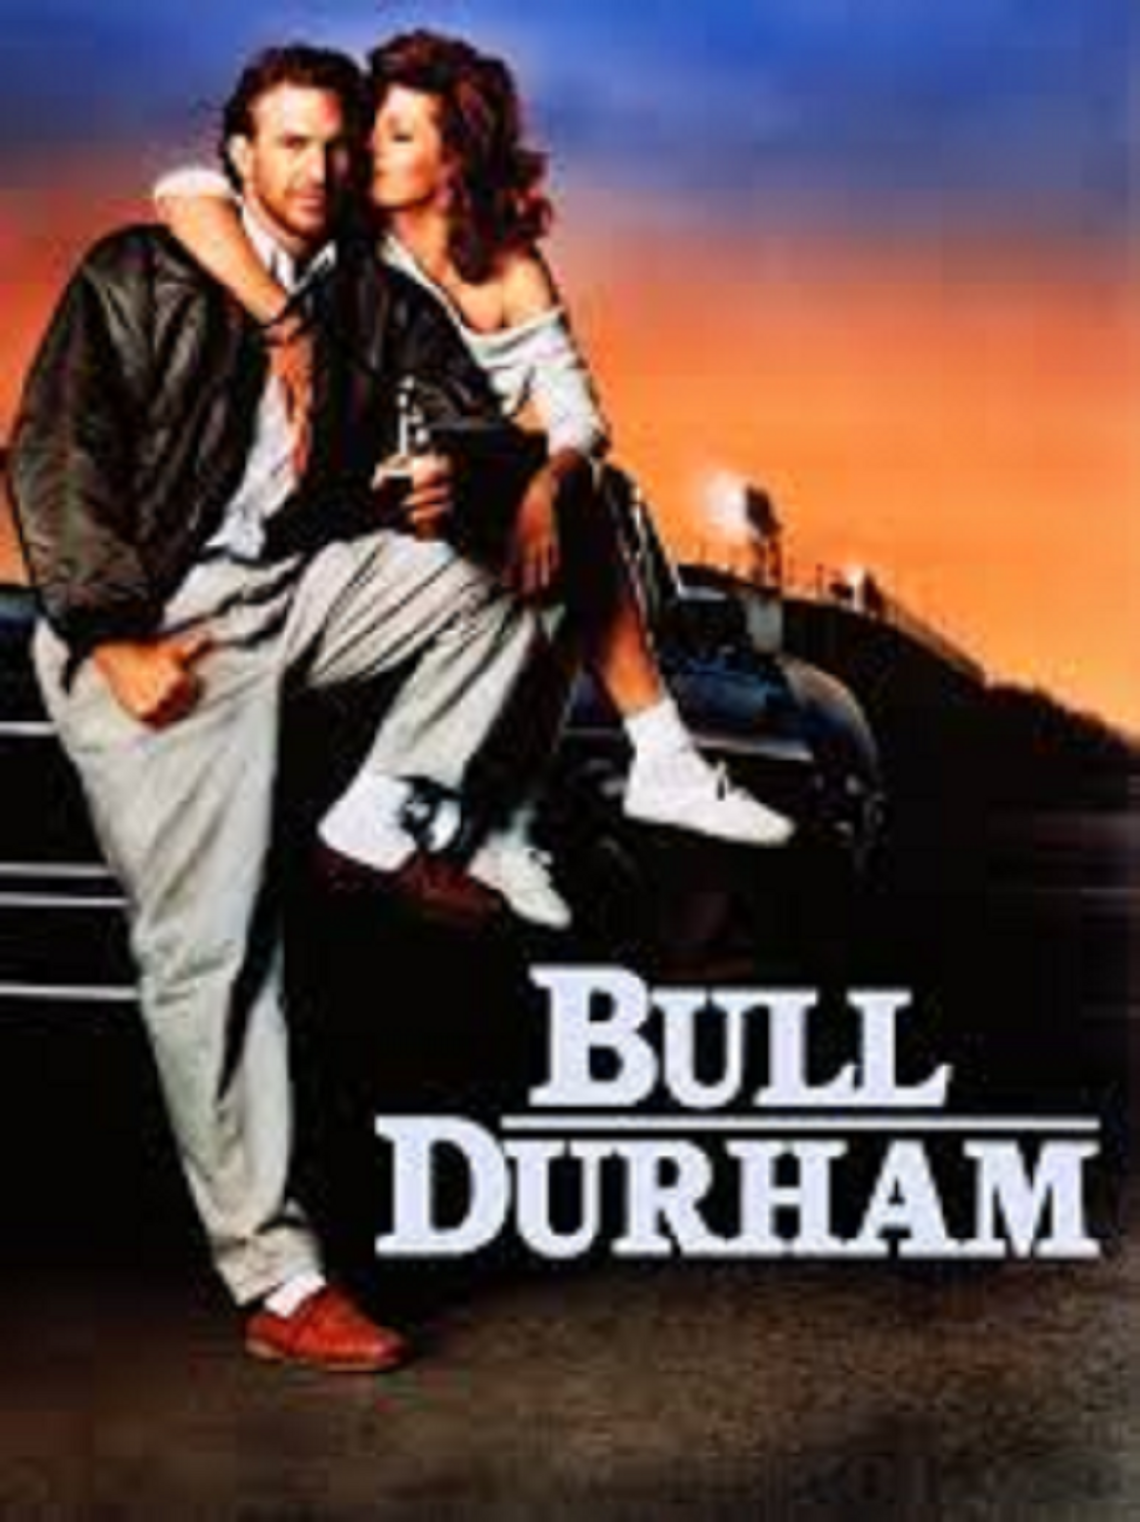 What will live forever – Bull Durham